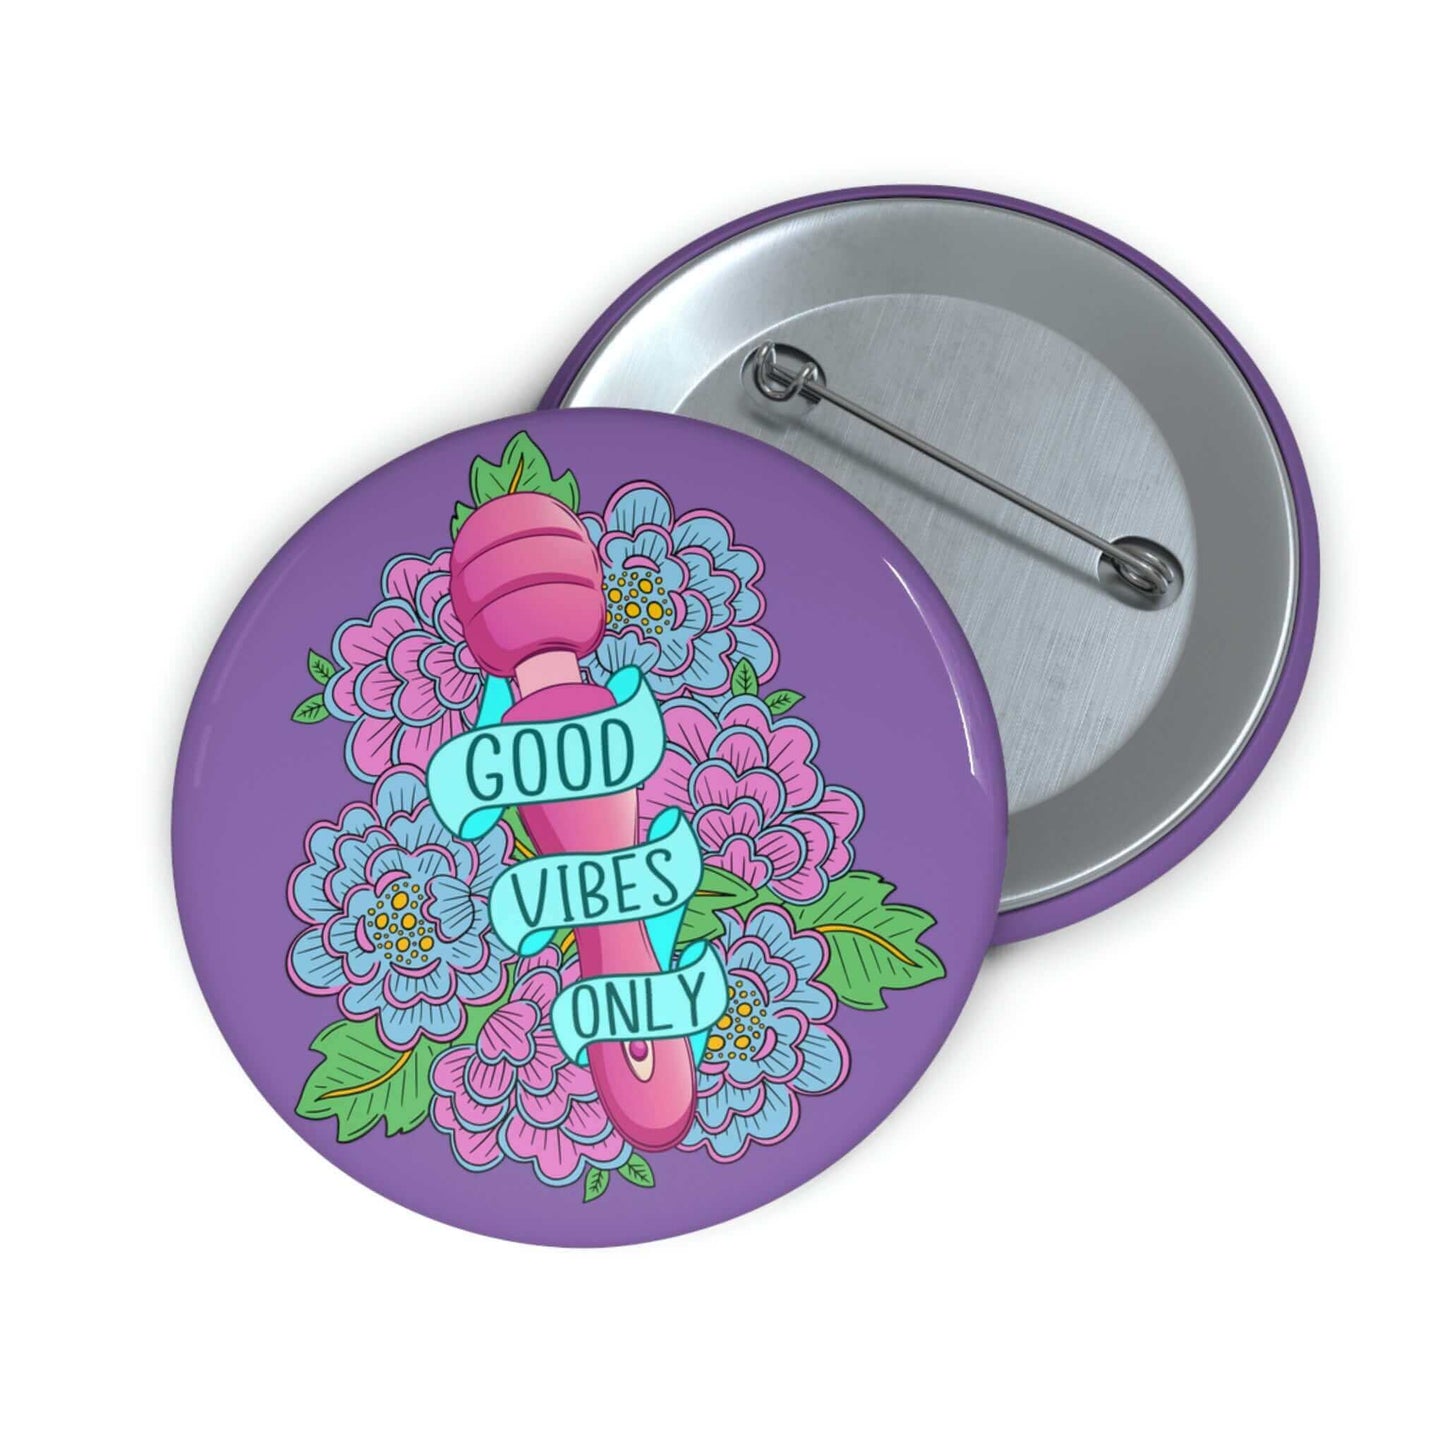 Good vibes only pin button